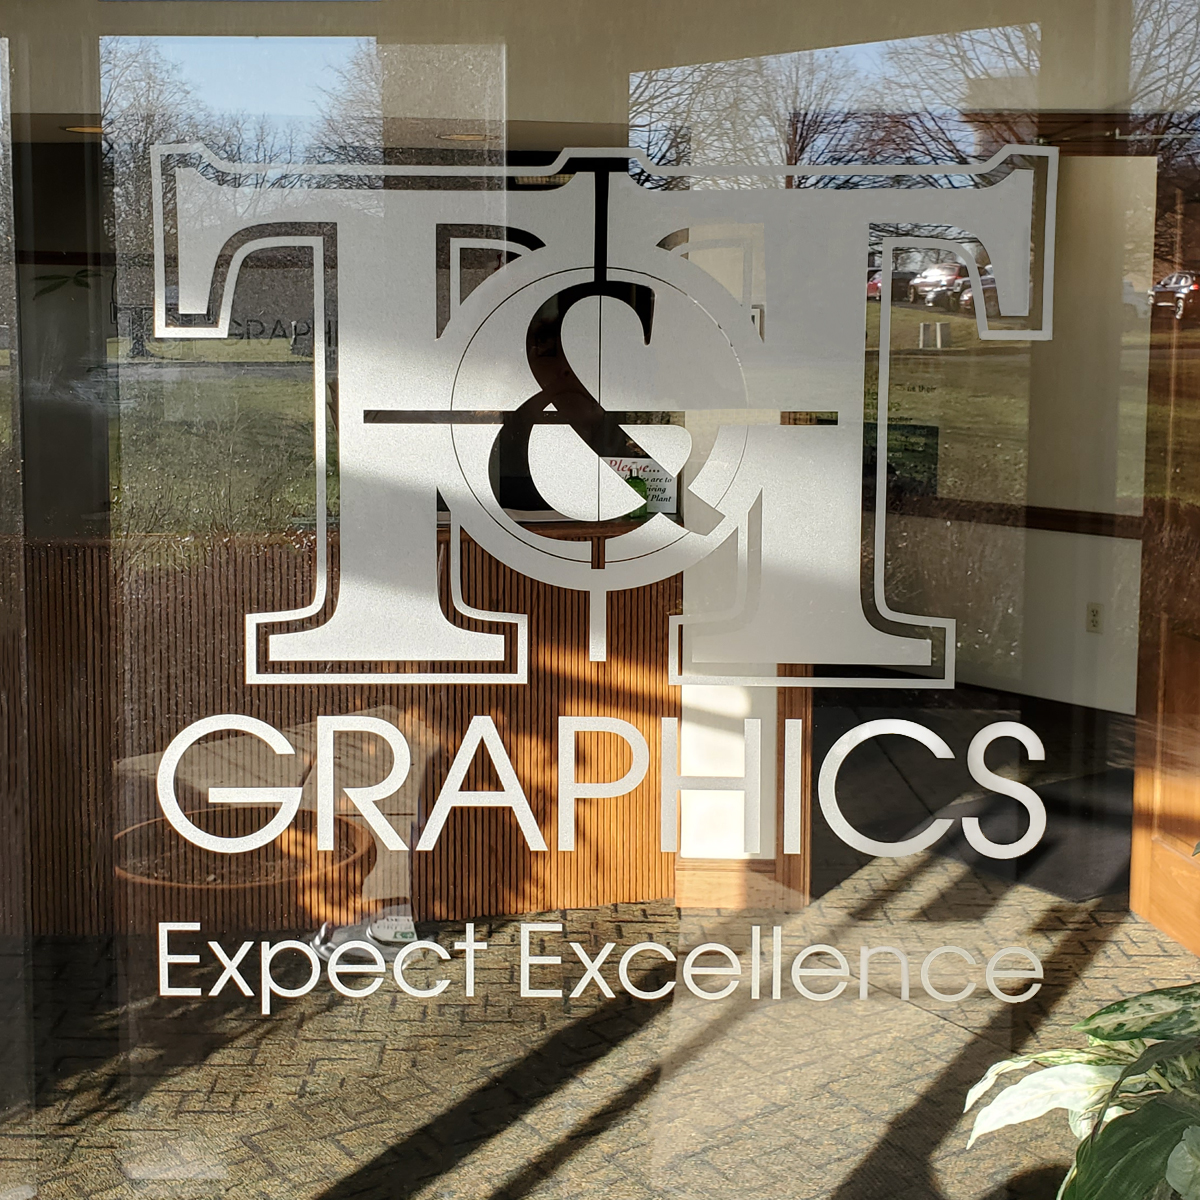 About T&T Graphics, Inc.